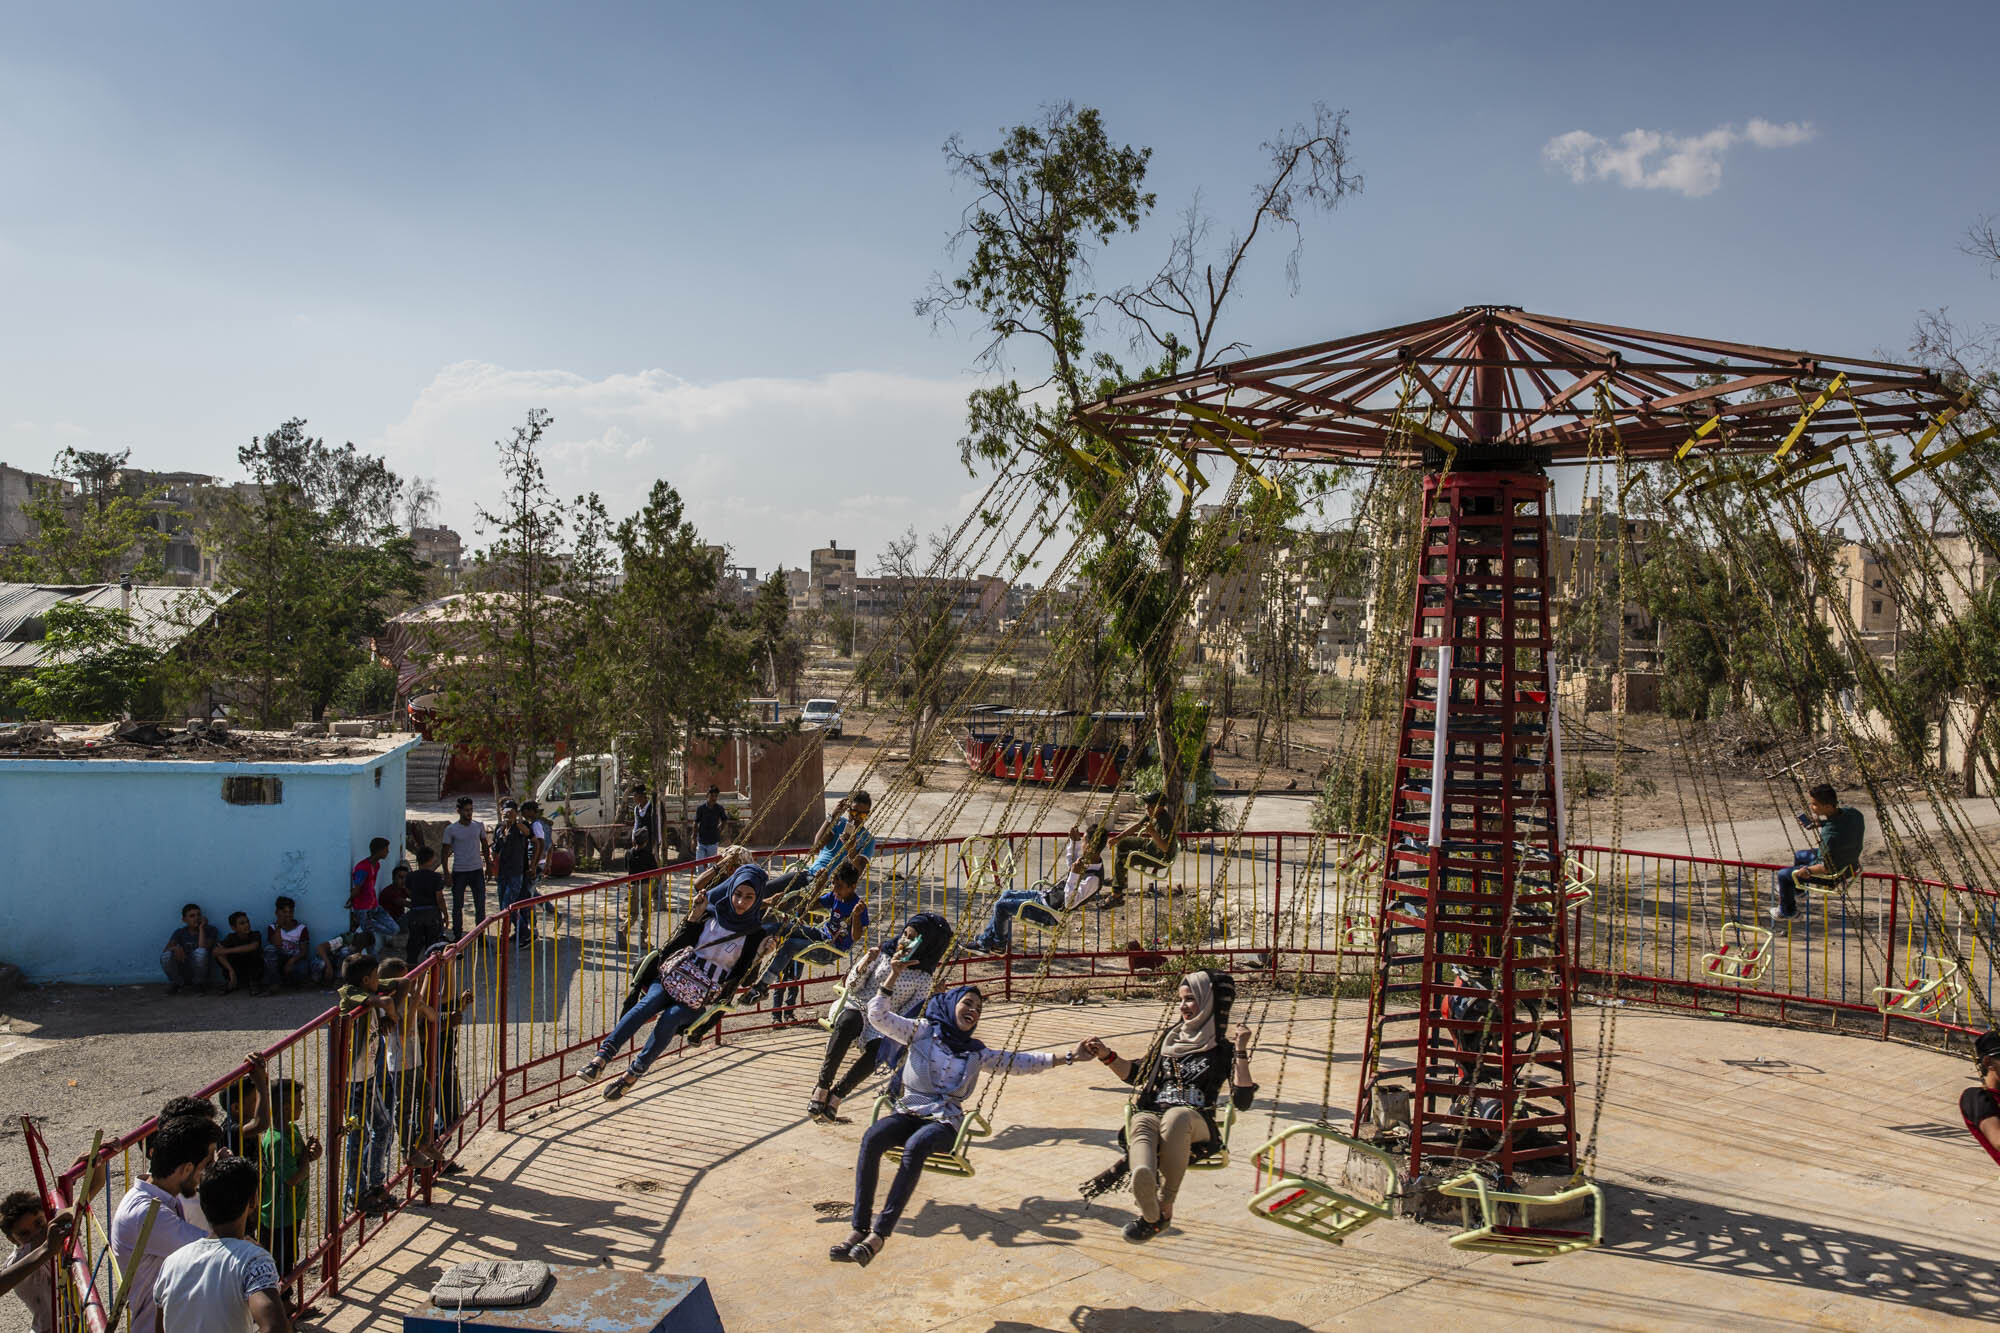  A group of teenage girls enjoyed a chair ride at a small amusement park in Raqqa on the first day of the Muslim holiday of Eid. Syria - June 2018 